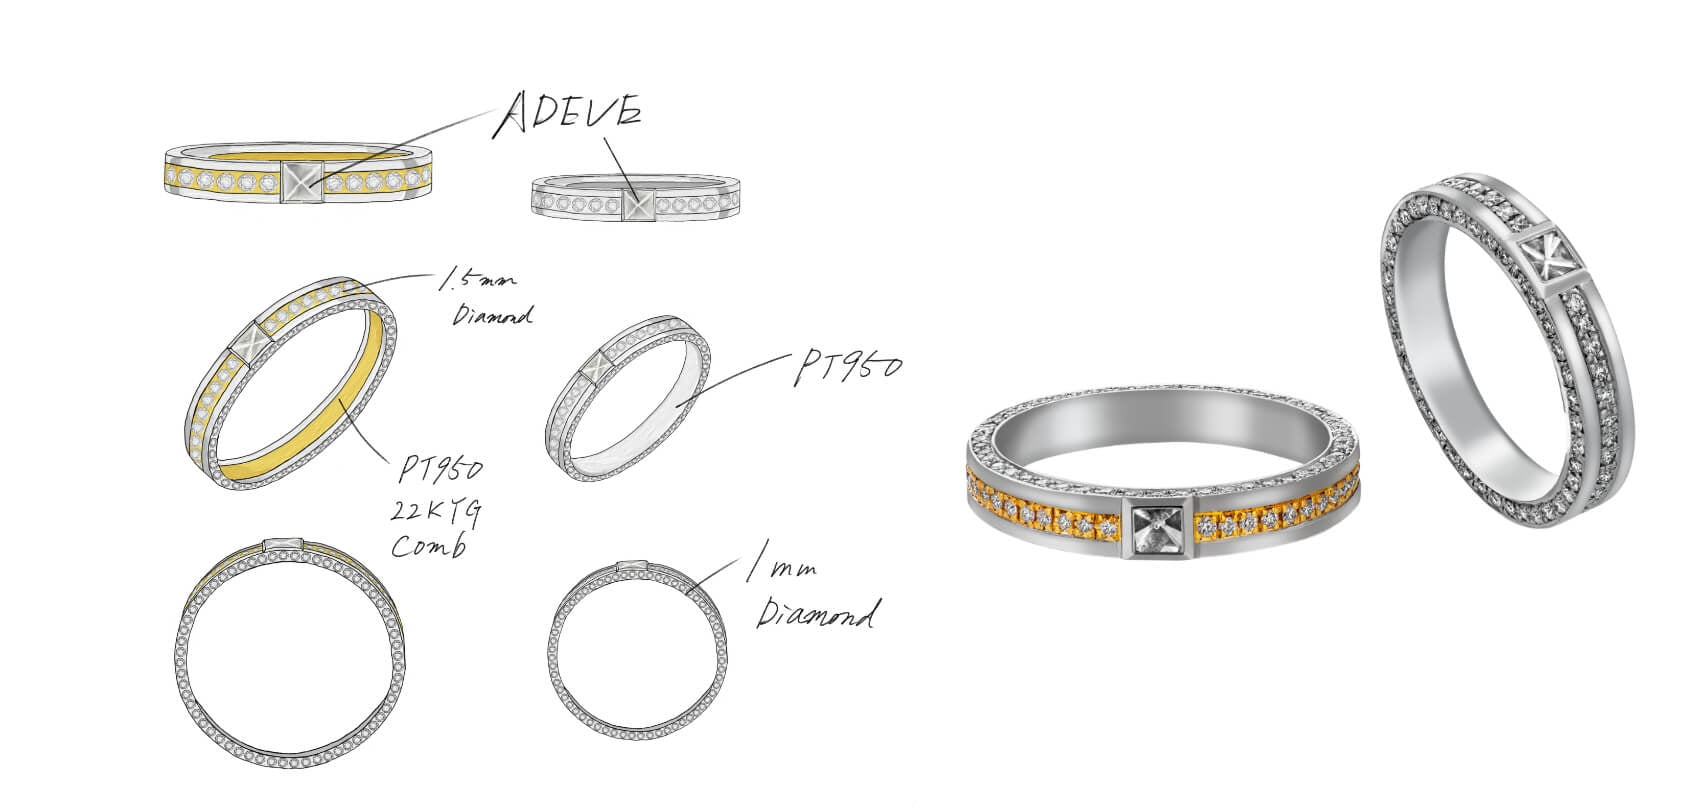 Capture your unique story in a ring.